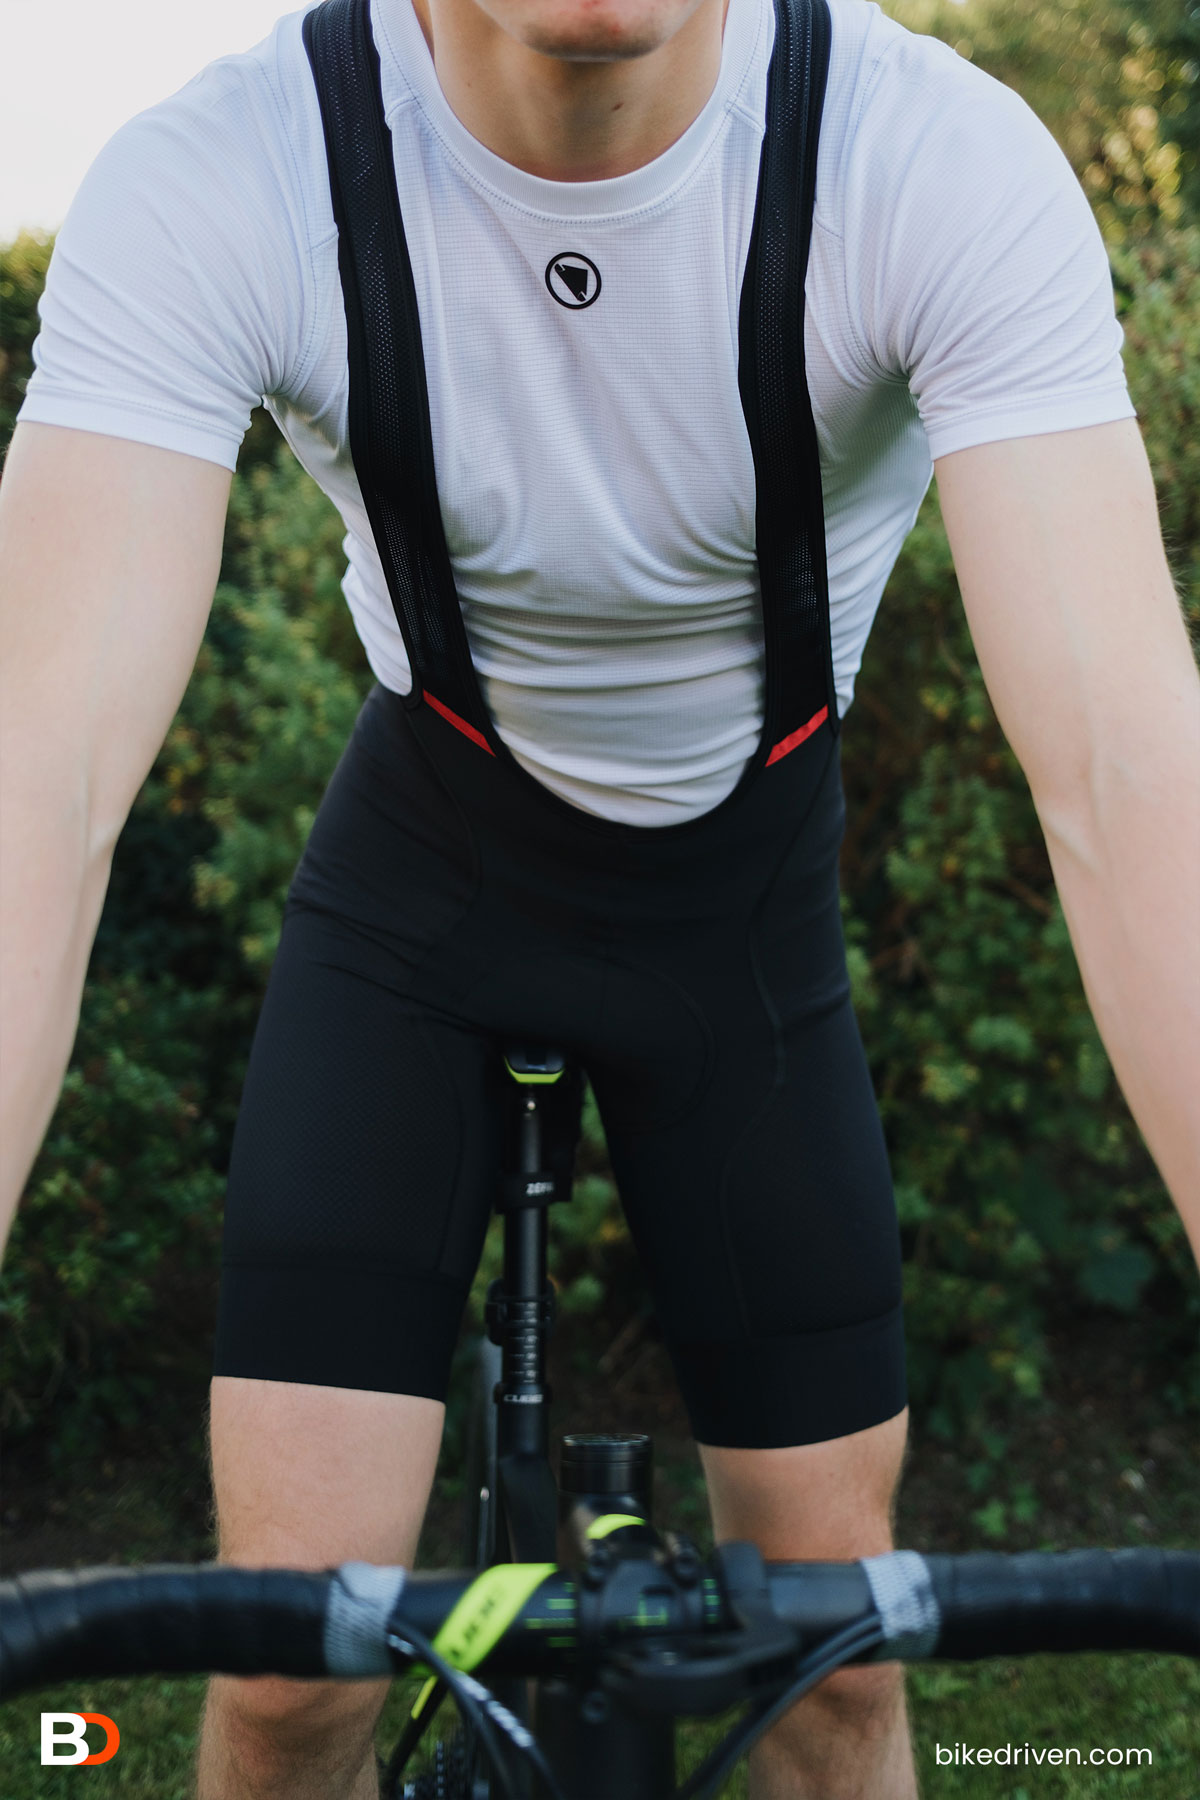 Castelli Competizione Bib Shorts Review: Tried and Tested